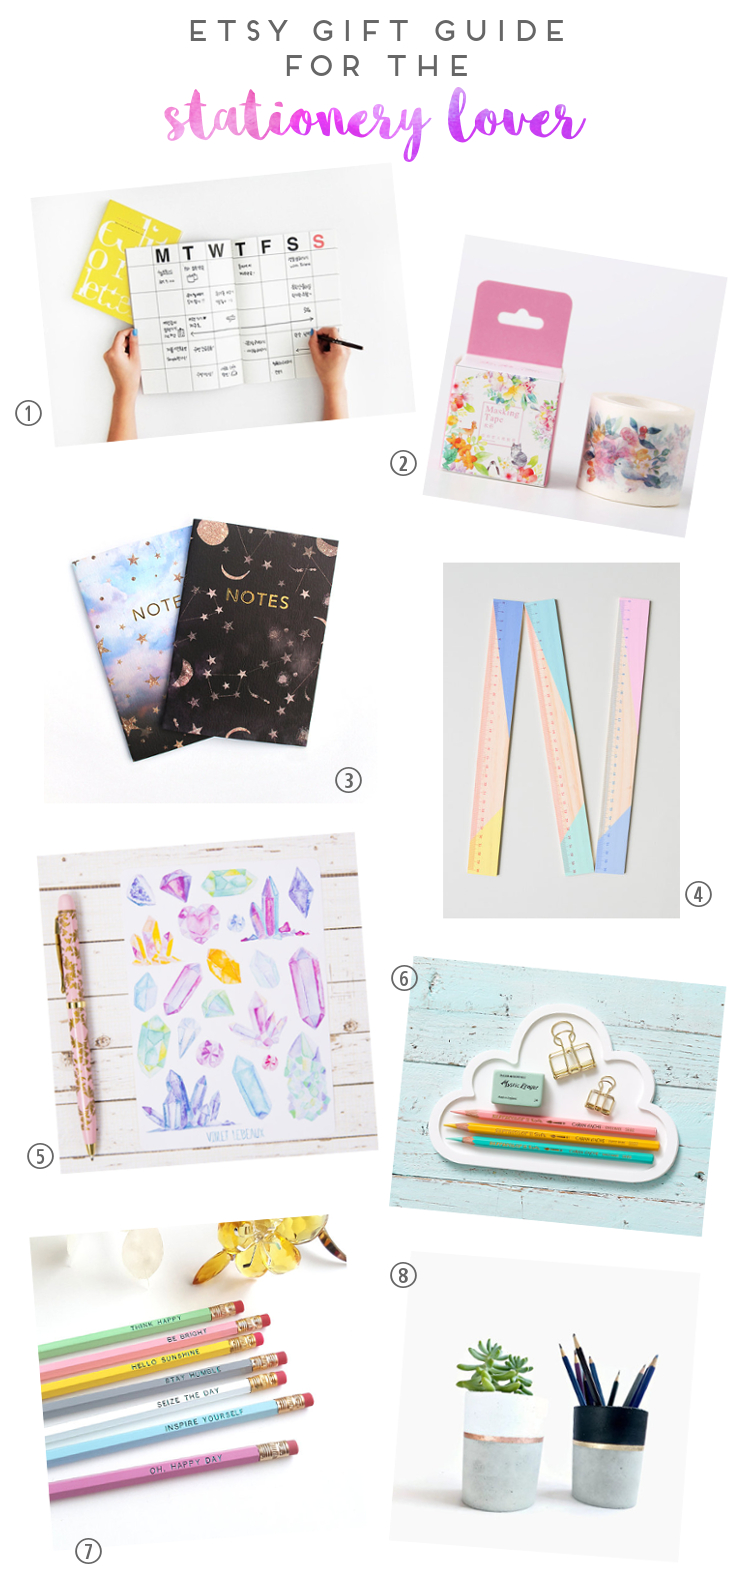 ETSY GIFT GUIDE FOR THE STATIONERY LOVER.